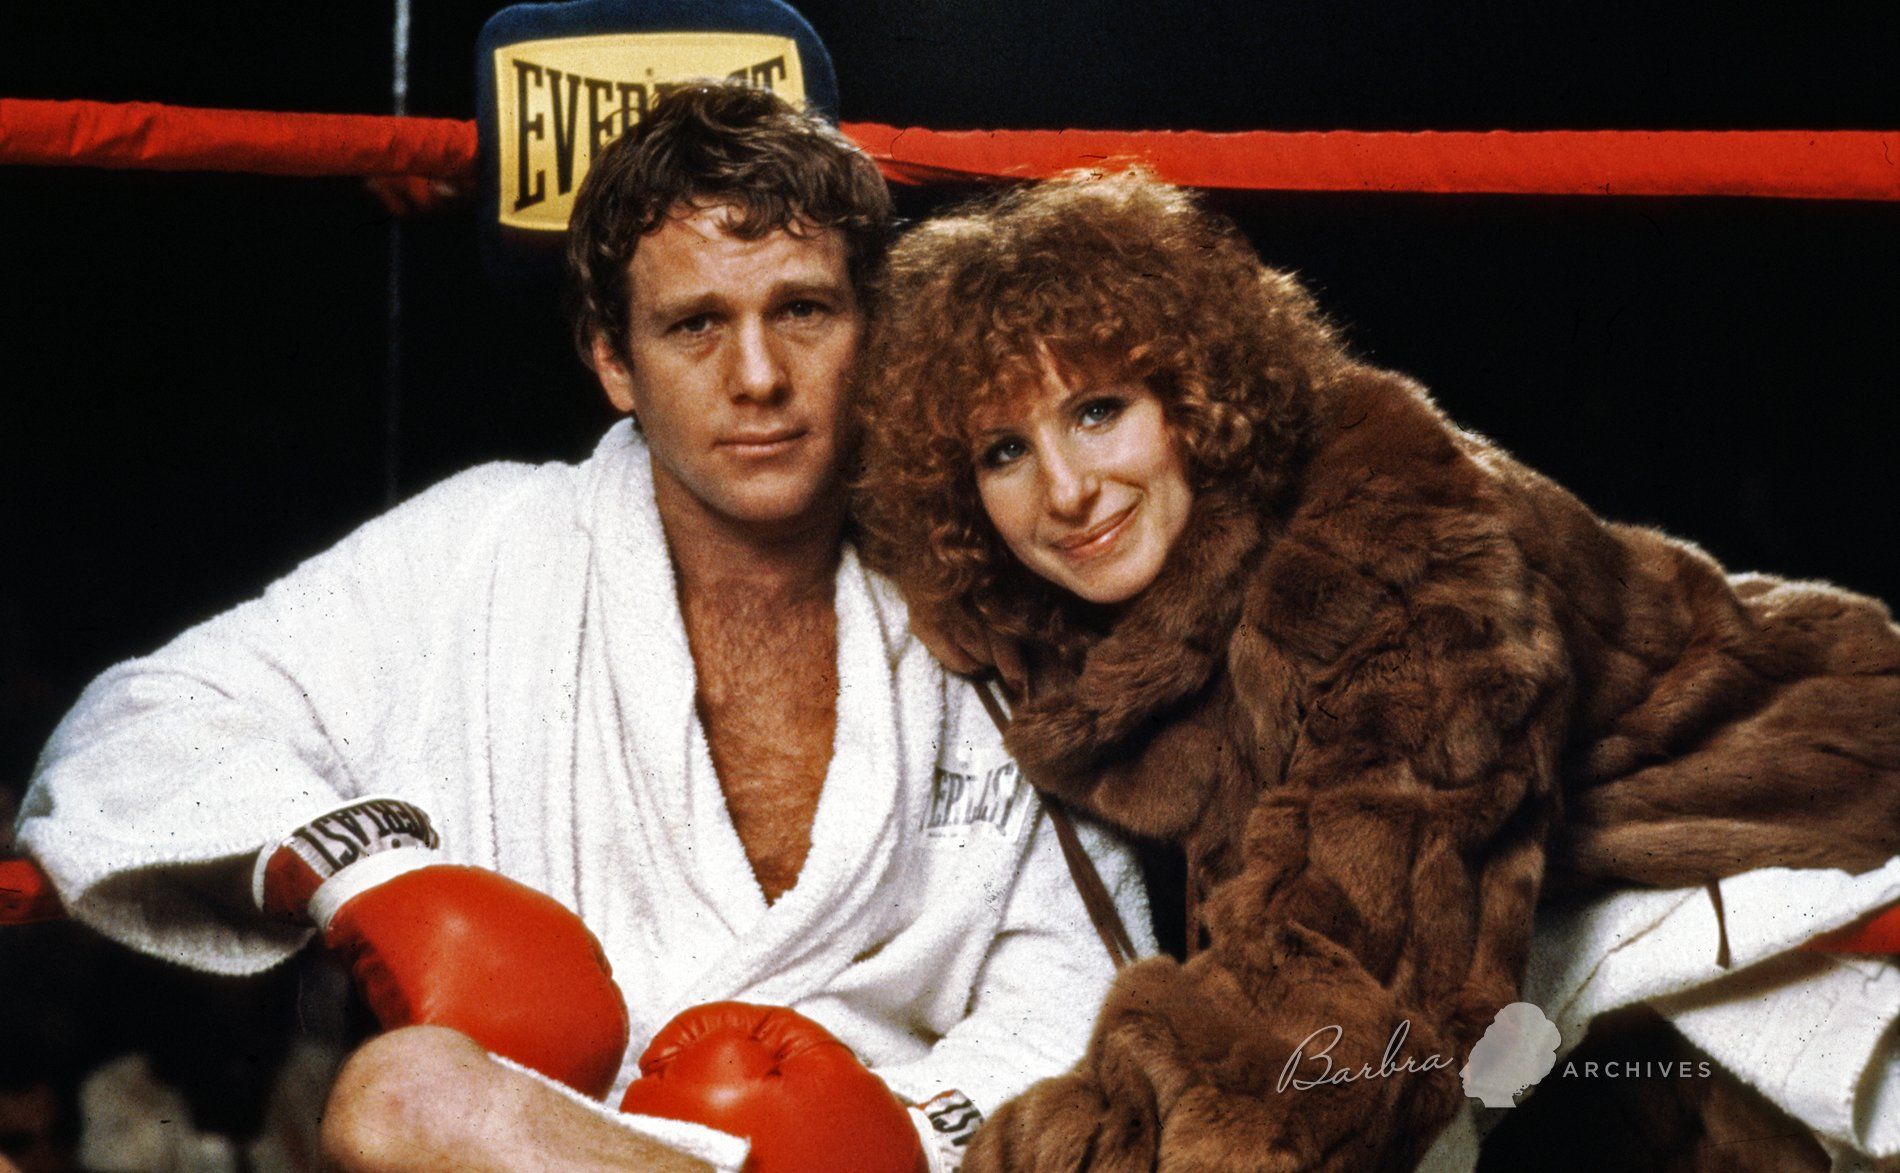 Ryan O'Neal and Barbra Streisand in the boxing ring.